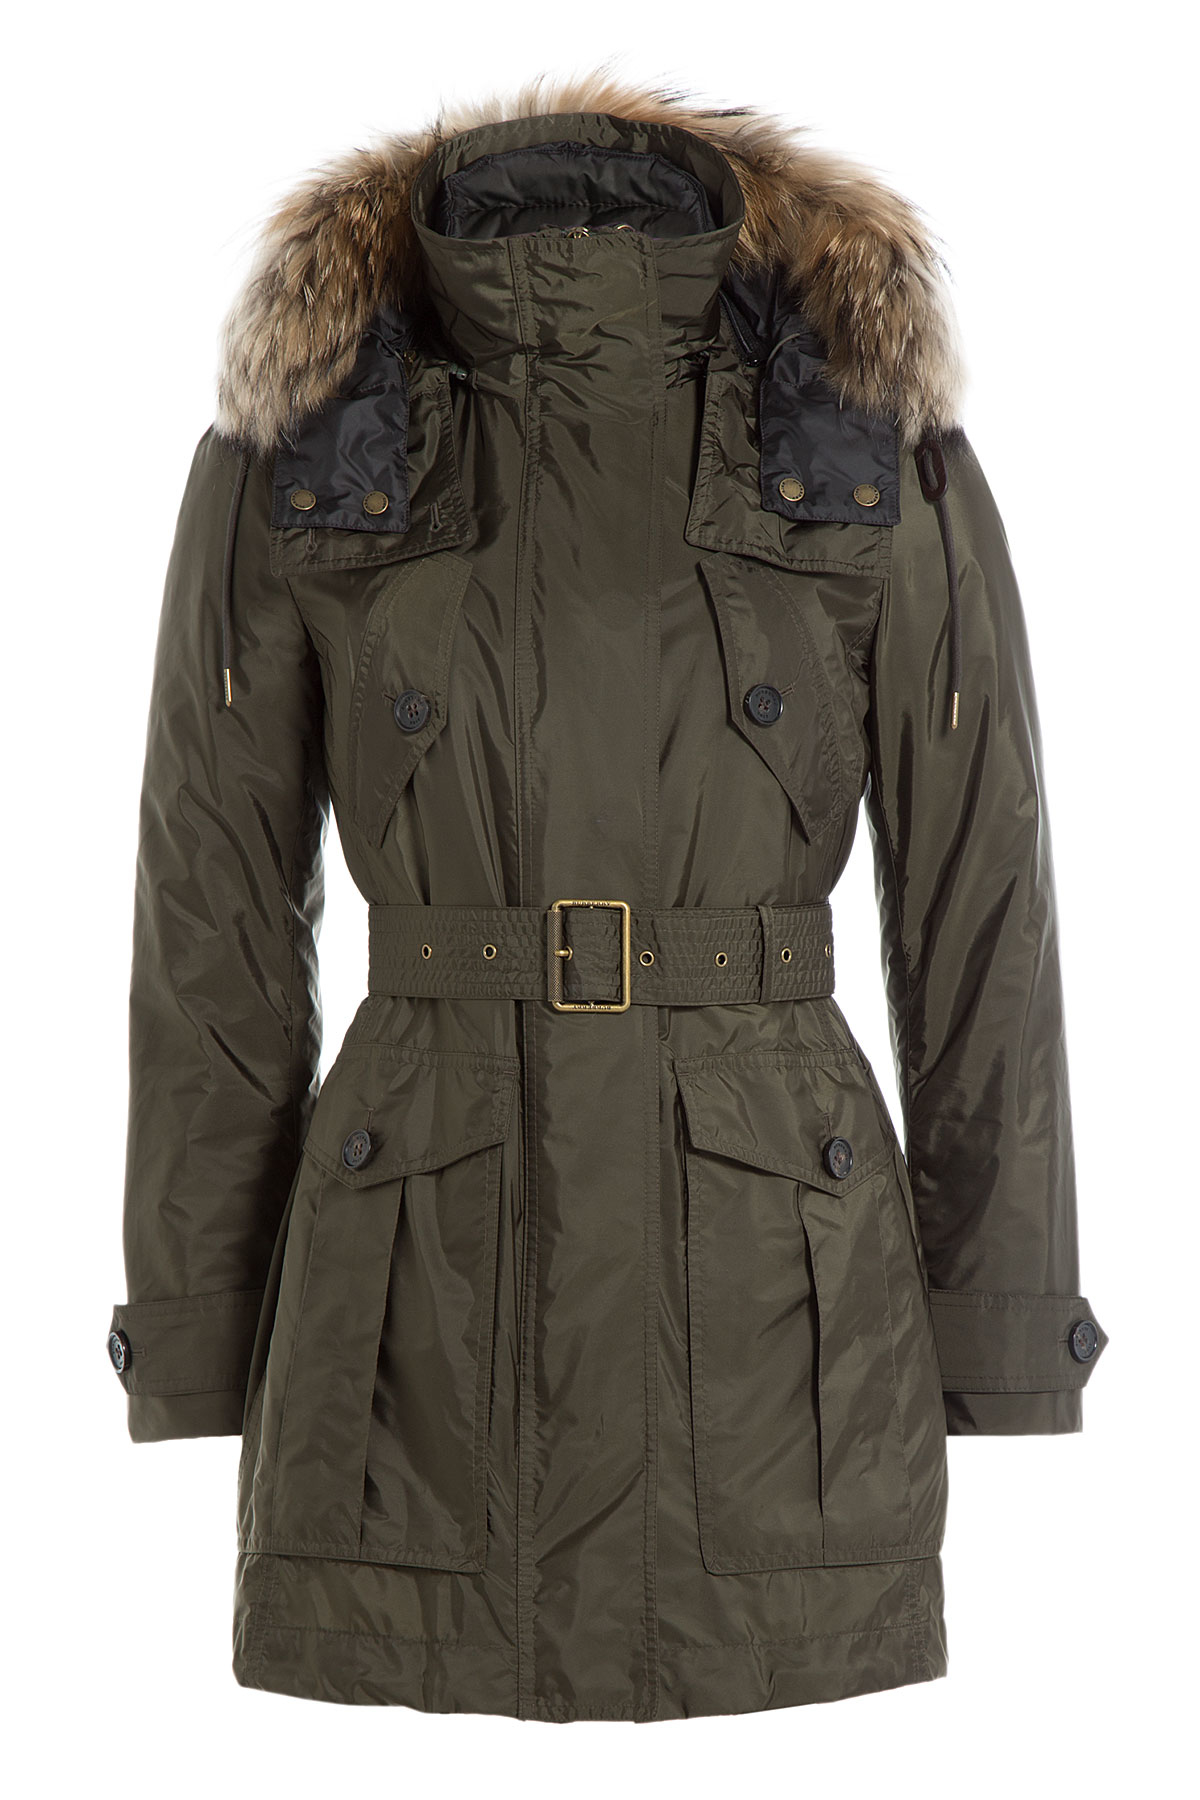 Lyst - Burberry Brit Down Parka With Fur Trimmed Hood - Green in Green